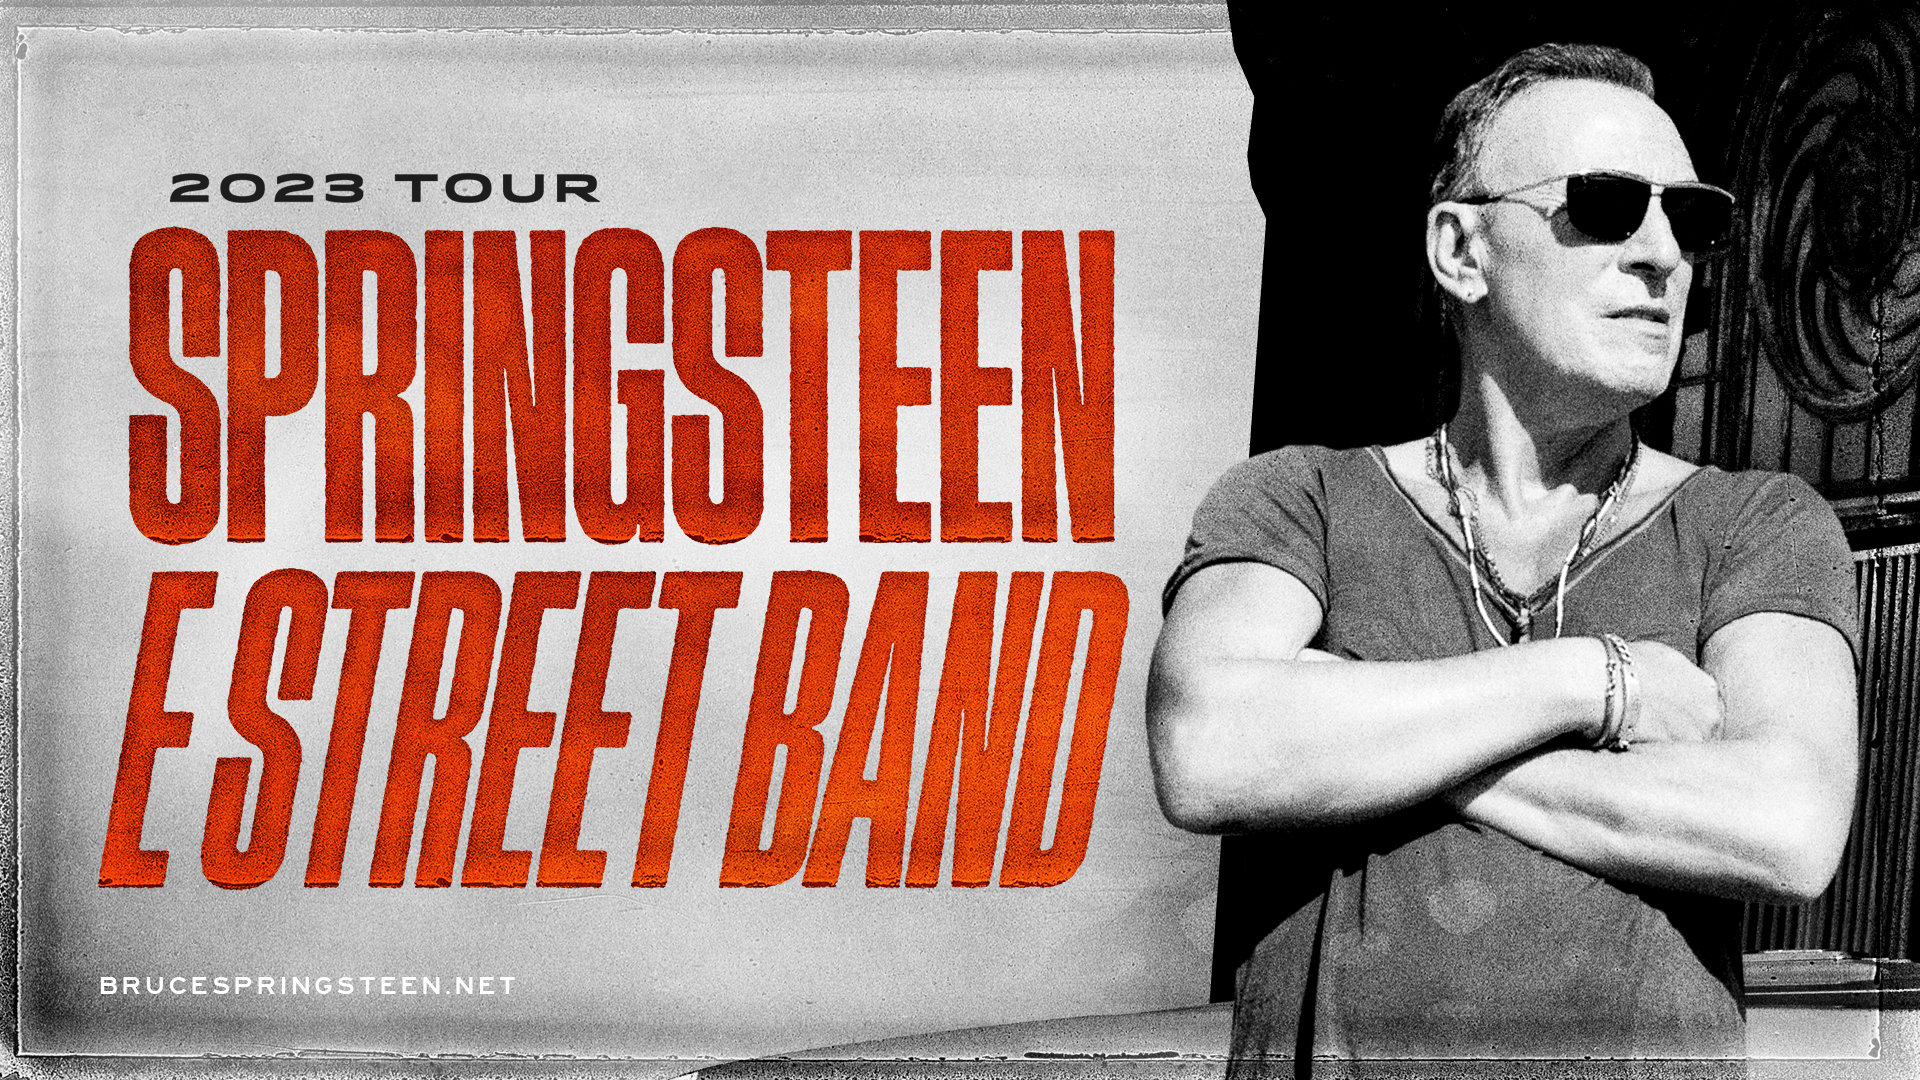 Bruce Springsteen and the E Street Band - 2023 Tour 